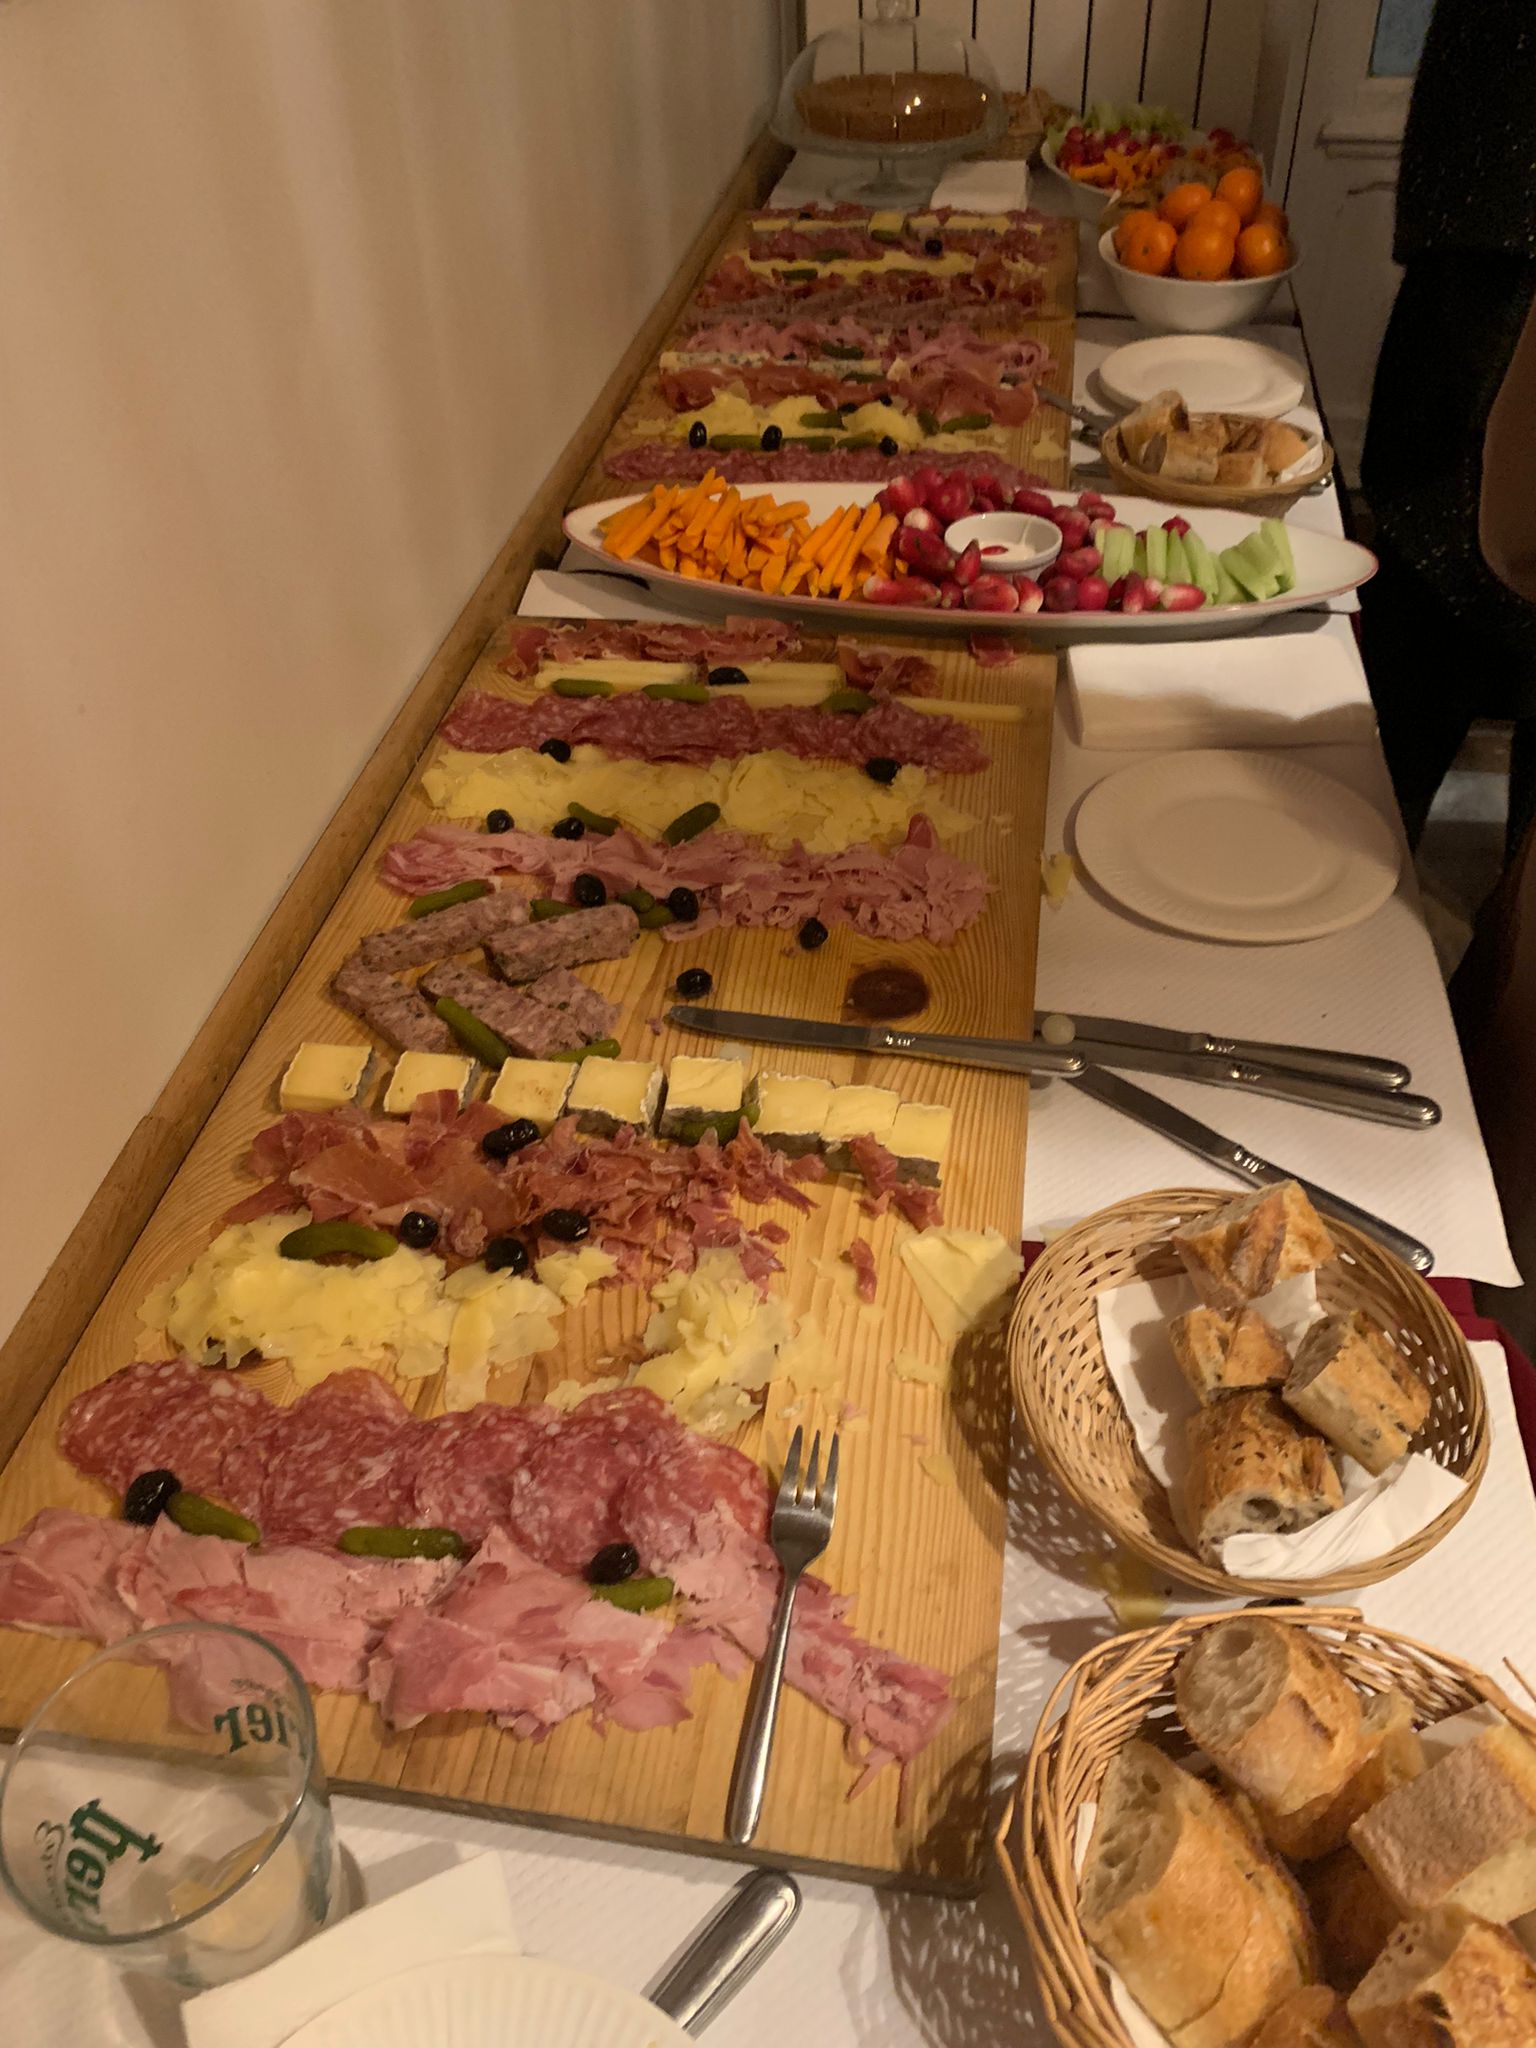 A charcuterie spread that includes cheese, meat, bread, and vegetables